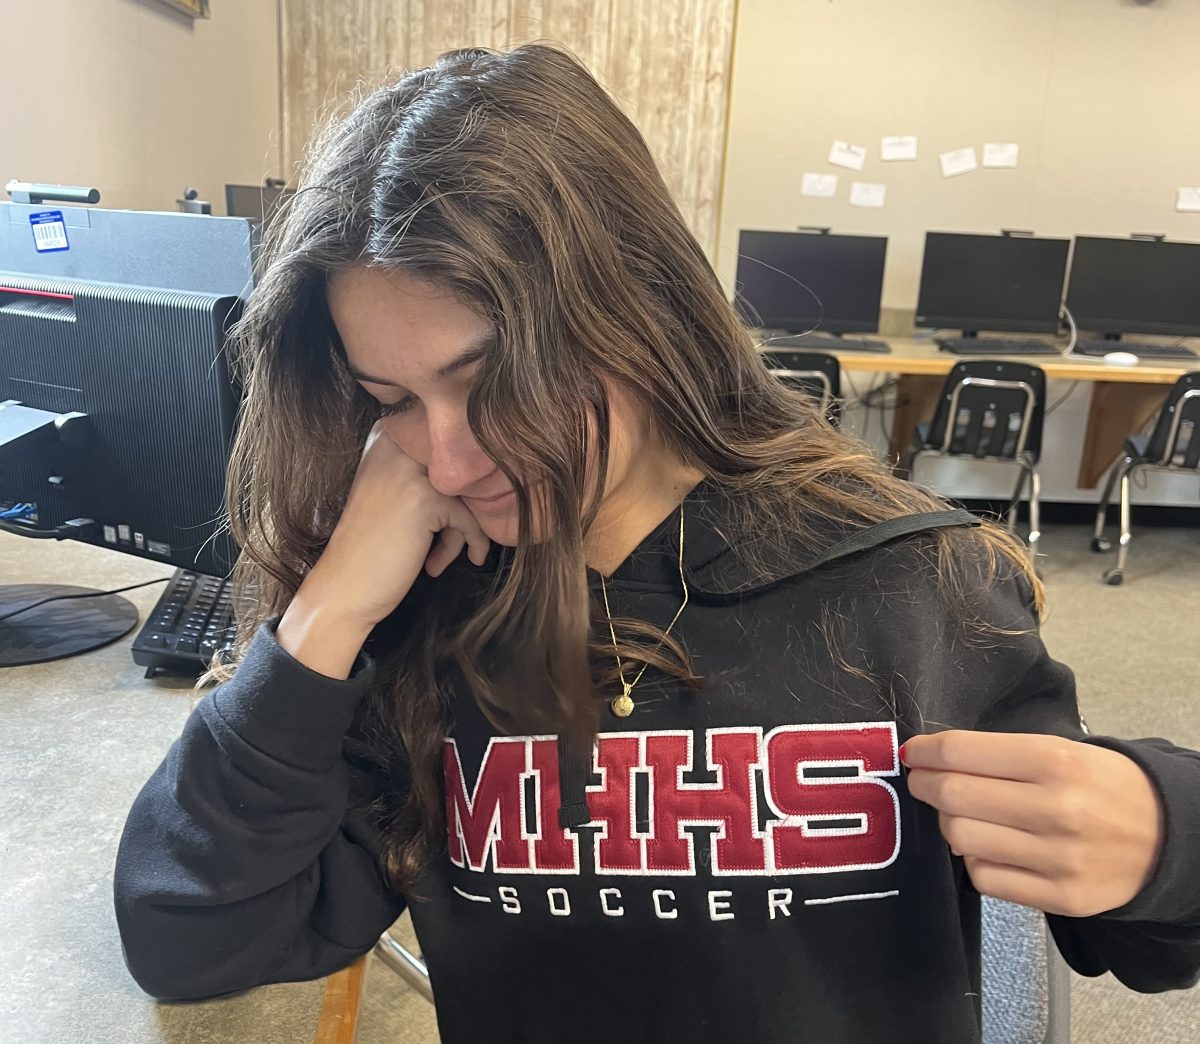 Payton+Aleksandrian+shows+off+her+MHHS+soccer+hoodie+as+she+plays+on+the+freshman+soccer+team.+She+loves+her+sport+but+the+unavailable+trainer+makes+her+question+her+safety+on+the+field.++I+wish+we+had+a+stable+trainer+so+I+know+I+can+give+my+all+on+the+field.